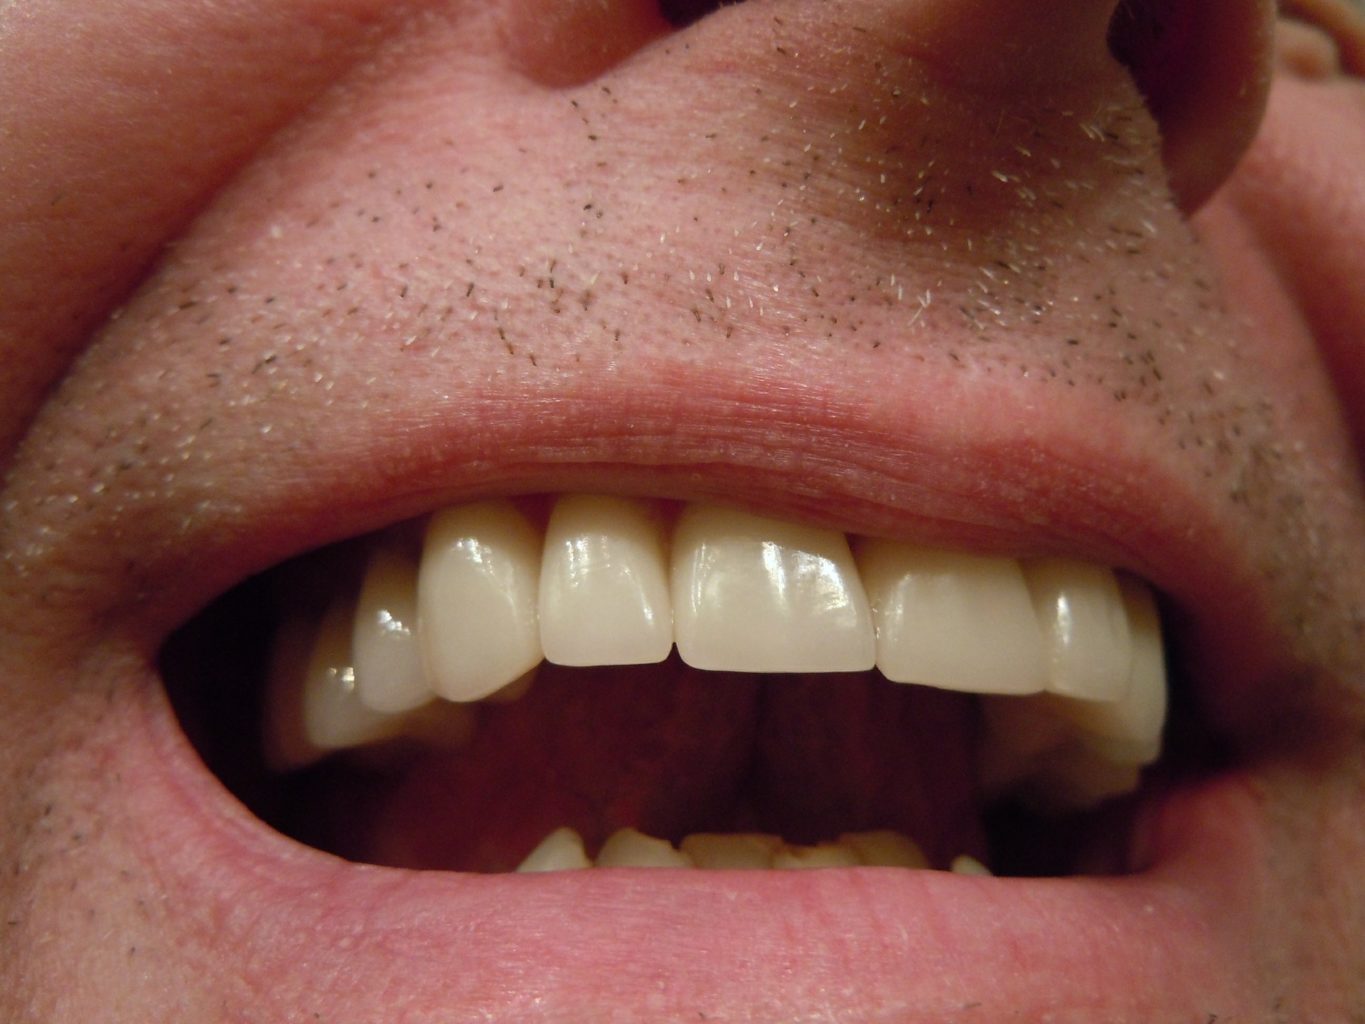 An up-close view of a man’s teeth